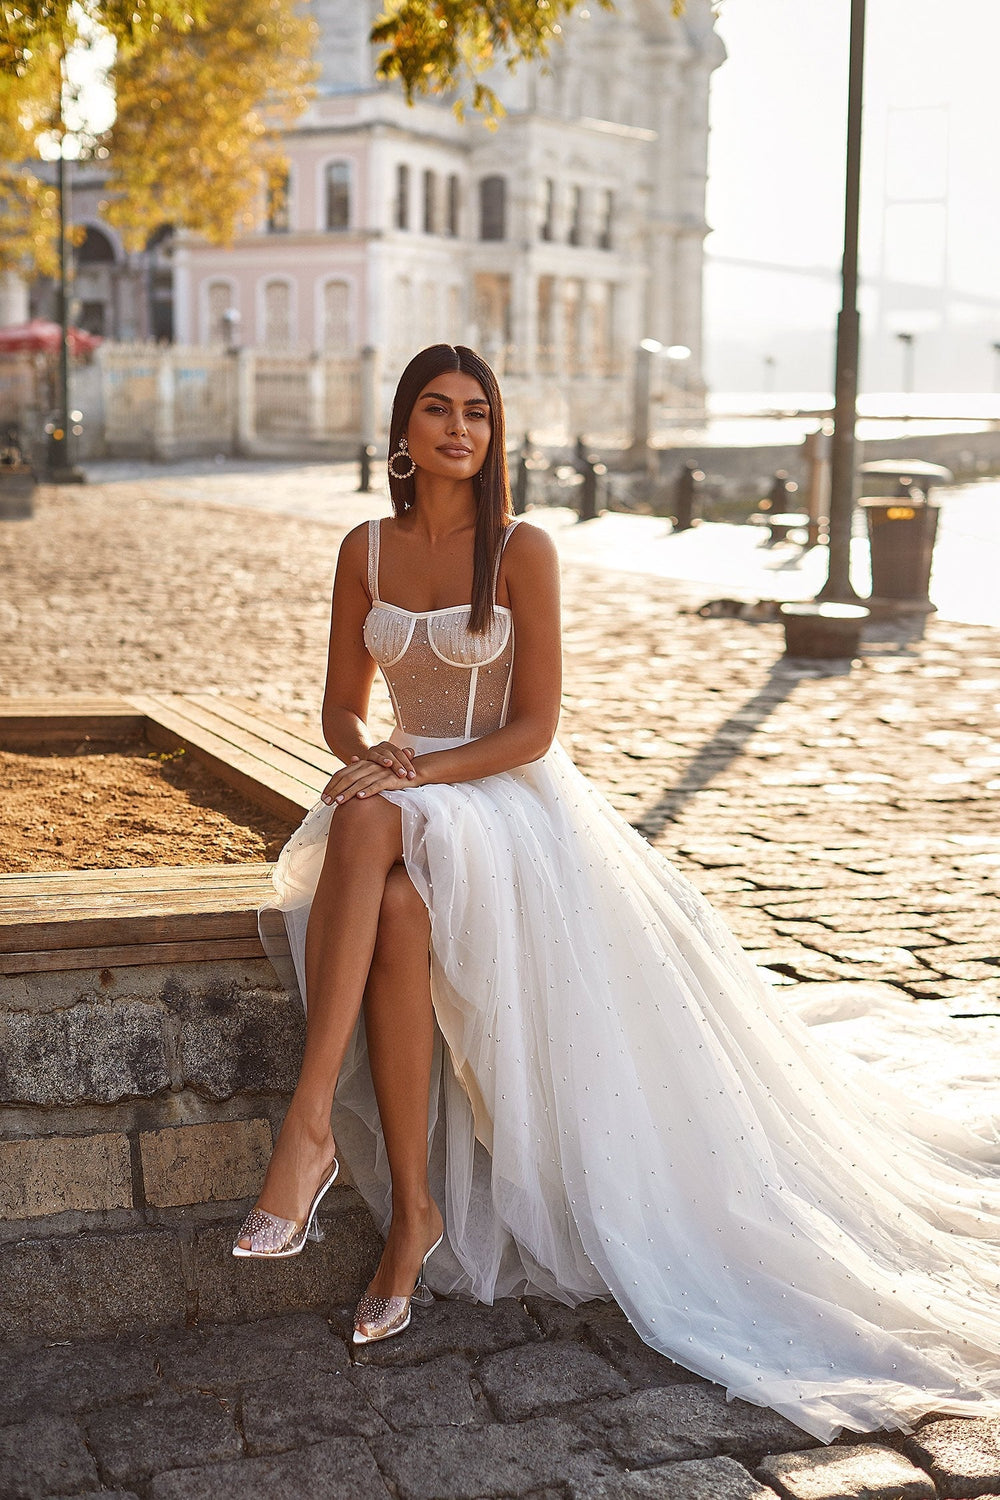 Jubaila Gown - Sheer Bustier Bridal Gown with Tulle and Pearls